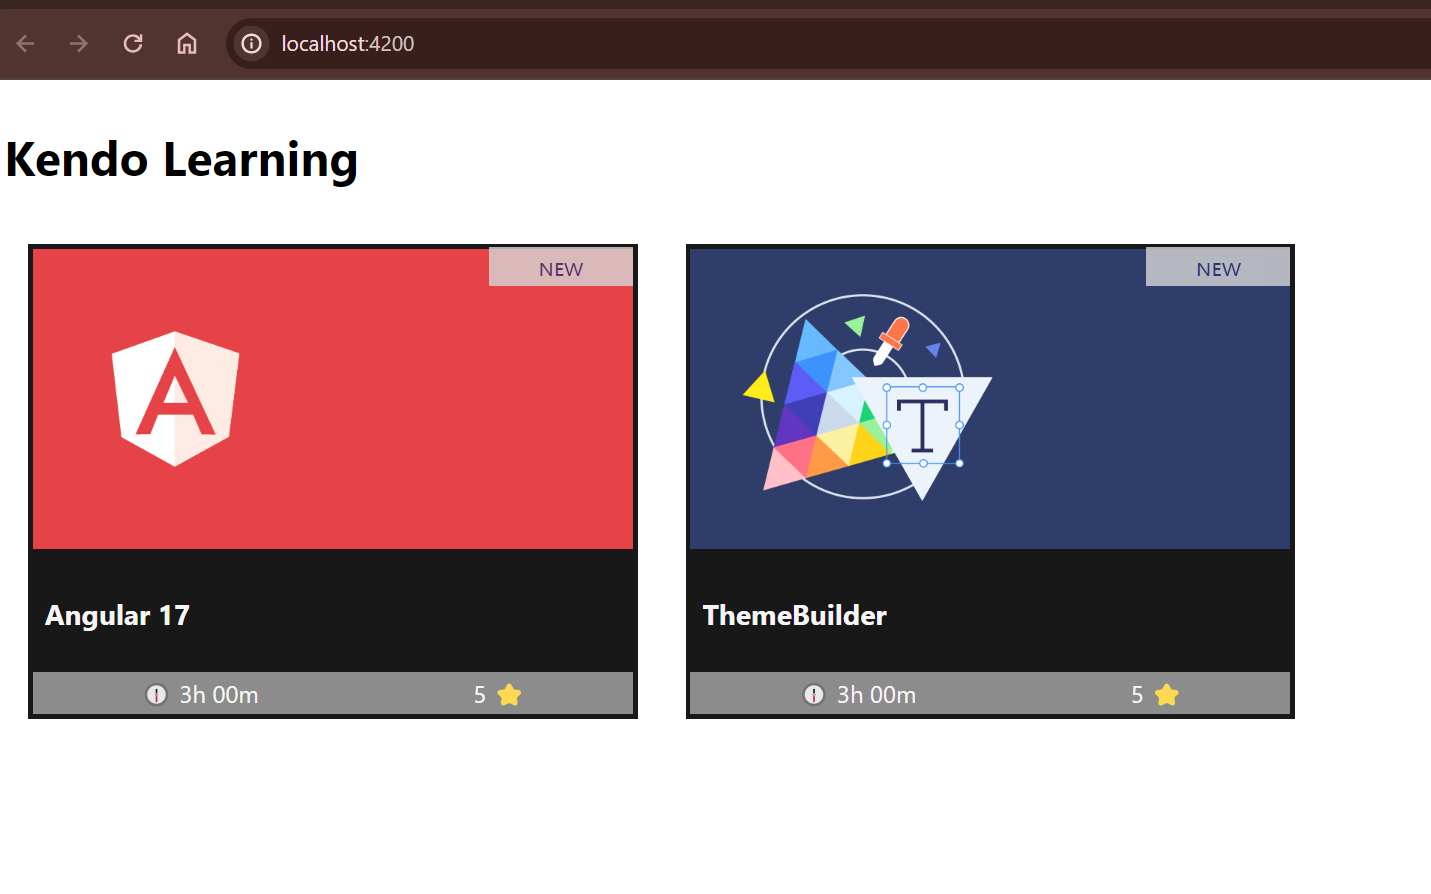 Two cards showing Angular 17 land ThemeBuilder learning courses, with length and stars for each.